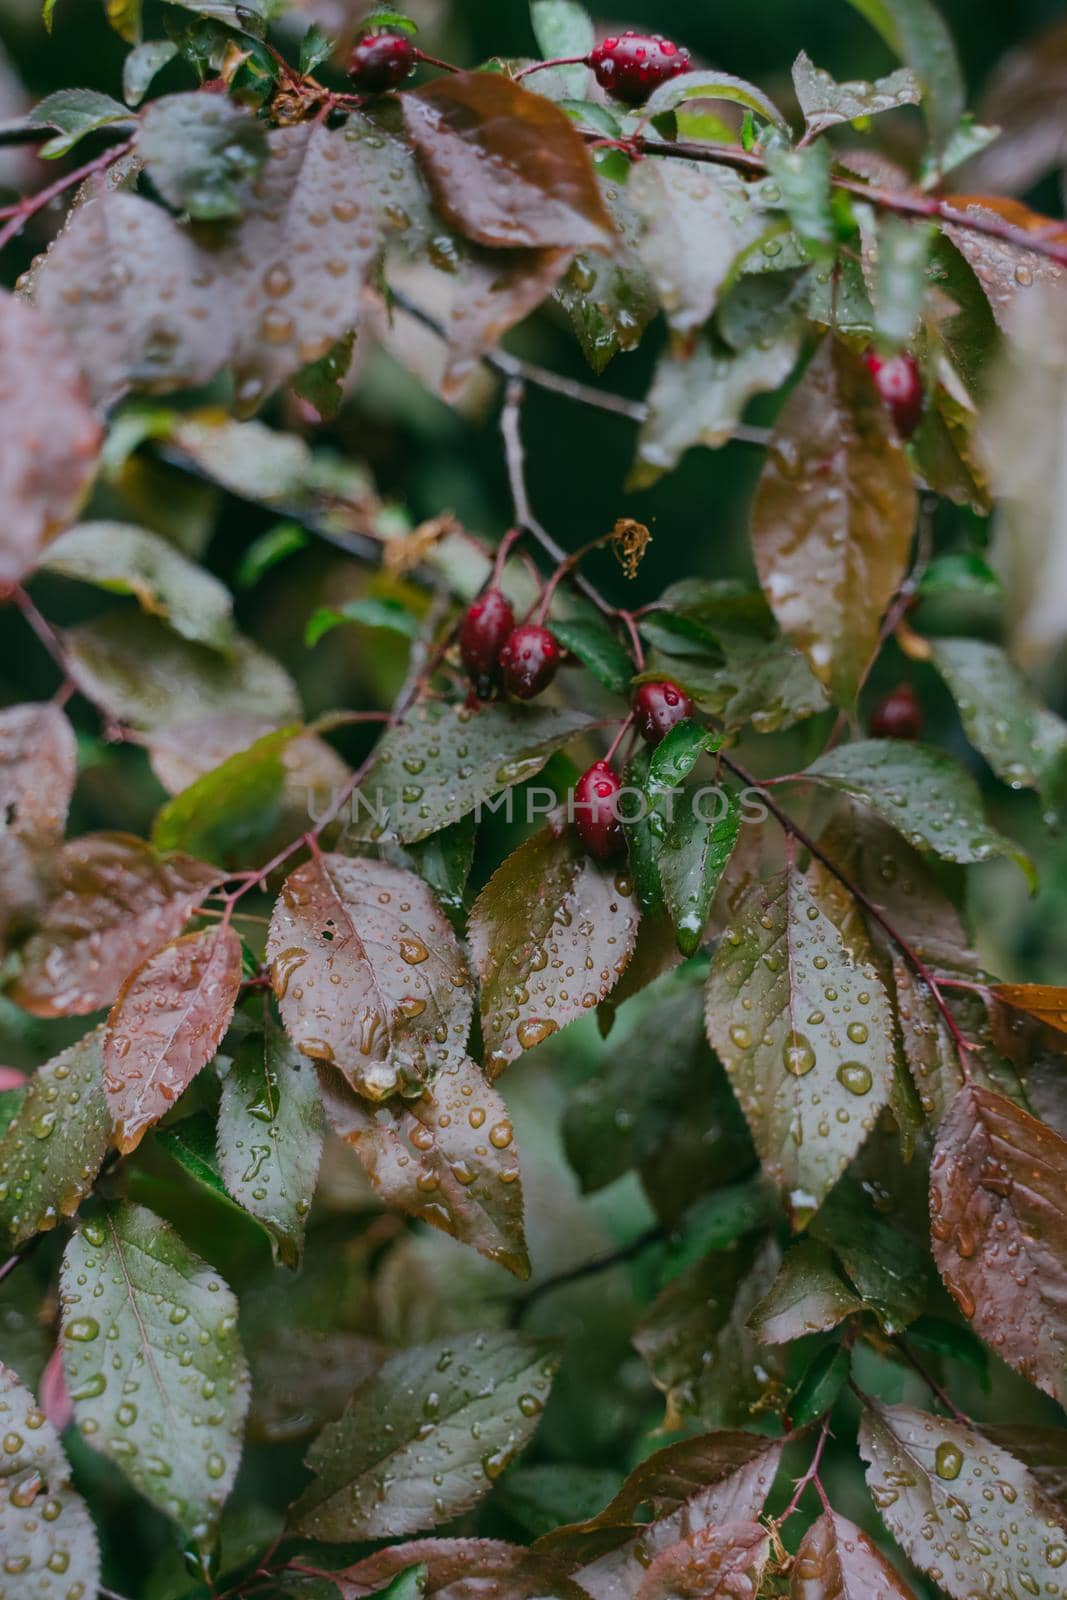 Red berries on a bush. Dogwood in raindrops. Red dogwood berries on a tree in raindrops. Vertical photo.